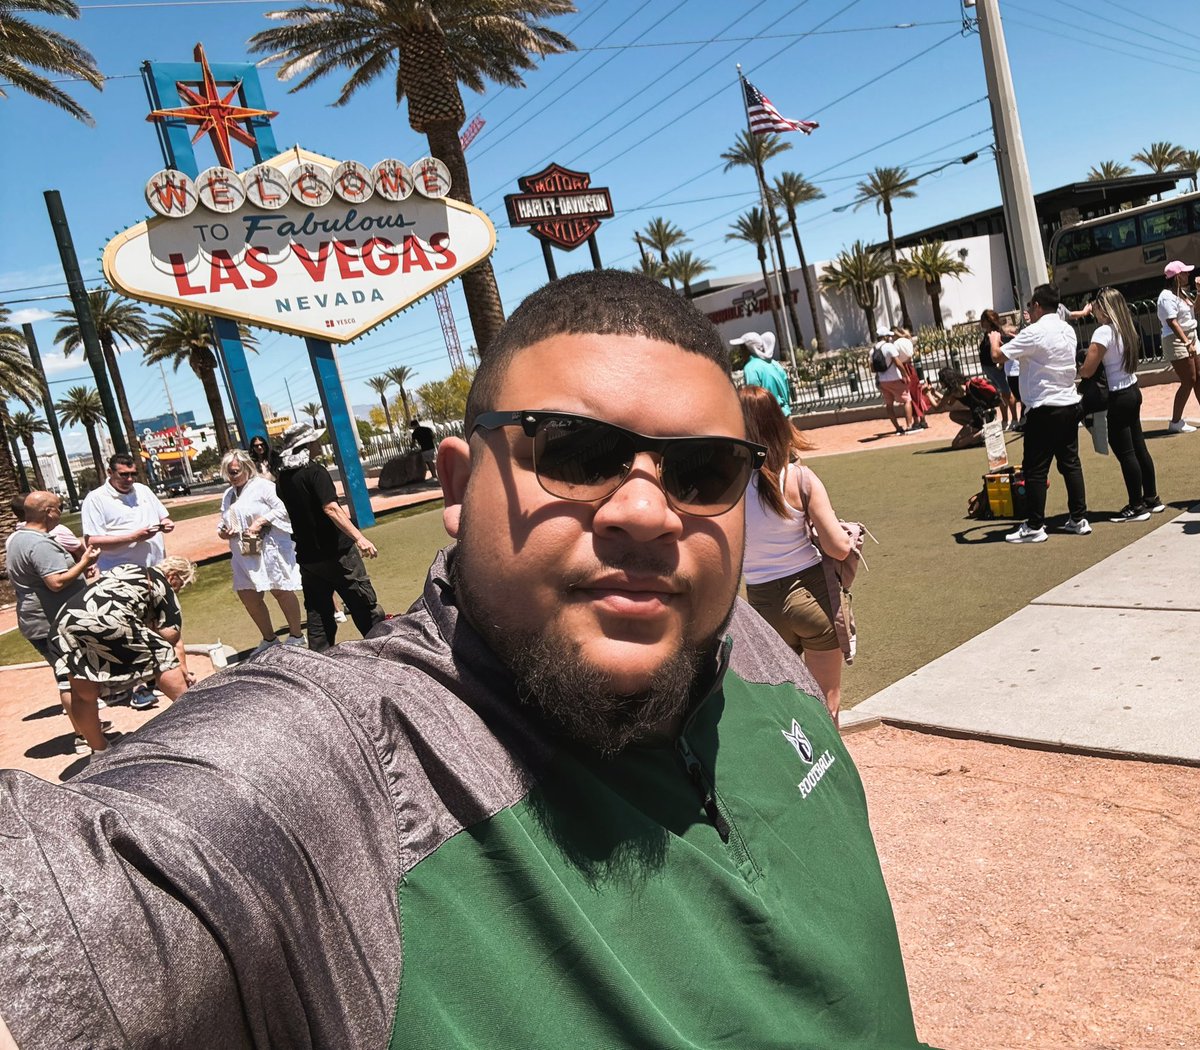 Portland ➡️ Vegas Last day on the road here in the 7️⃣0️⃣2️⃣ trying to hit the jackpot on some more ballers from the home town!! 🏠 🏈 👀 Sin City 🎰 to the Rose City 🌹 is the move!! Time to #JoinTheInvasion ⚔️ and become the next great #VegasViking 🖖🏽 to join us! #GoViks 🟢⚫️